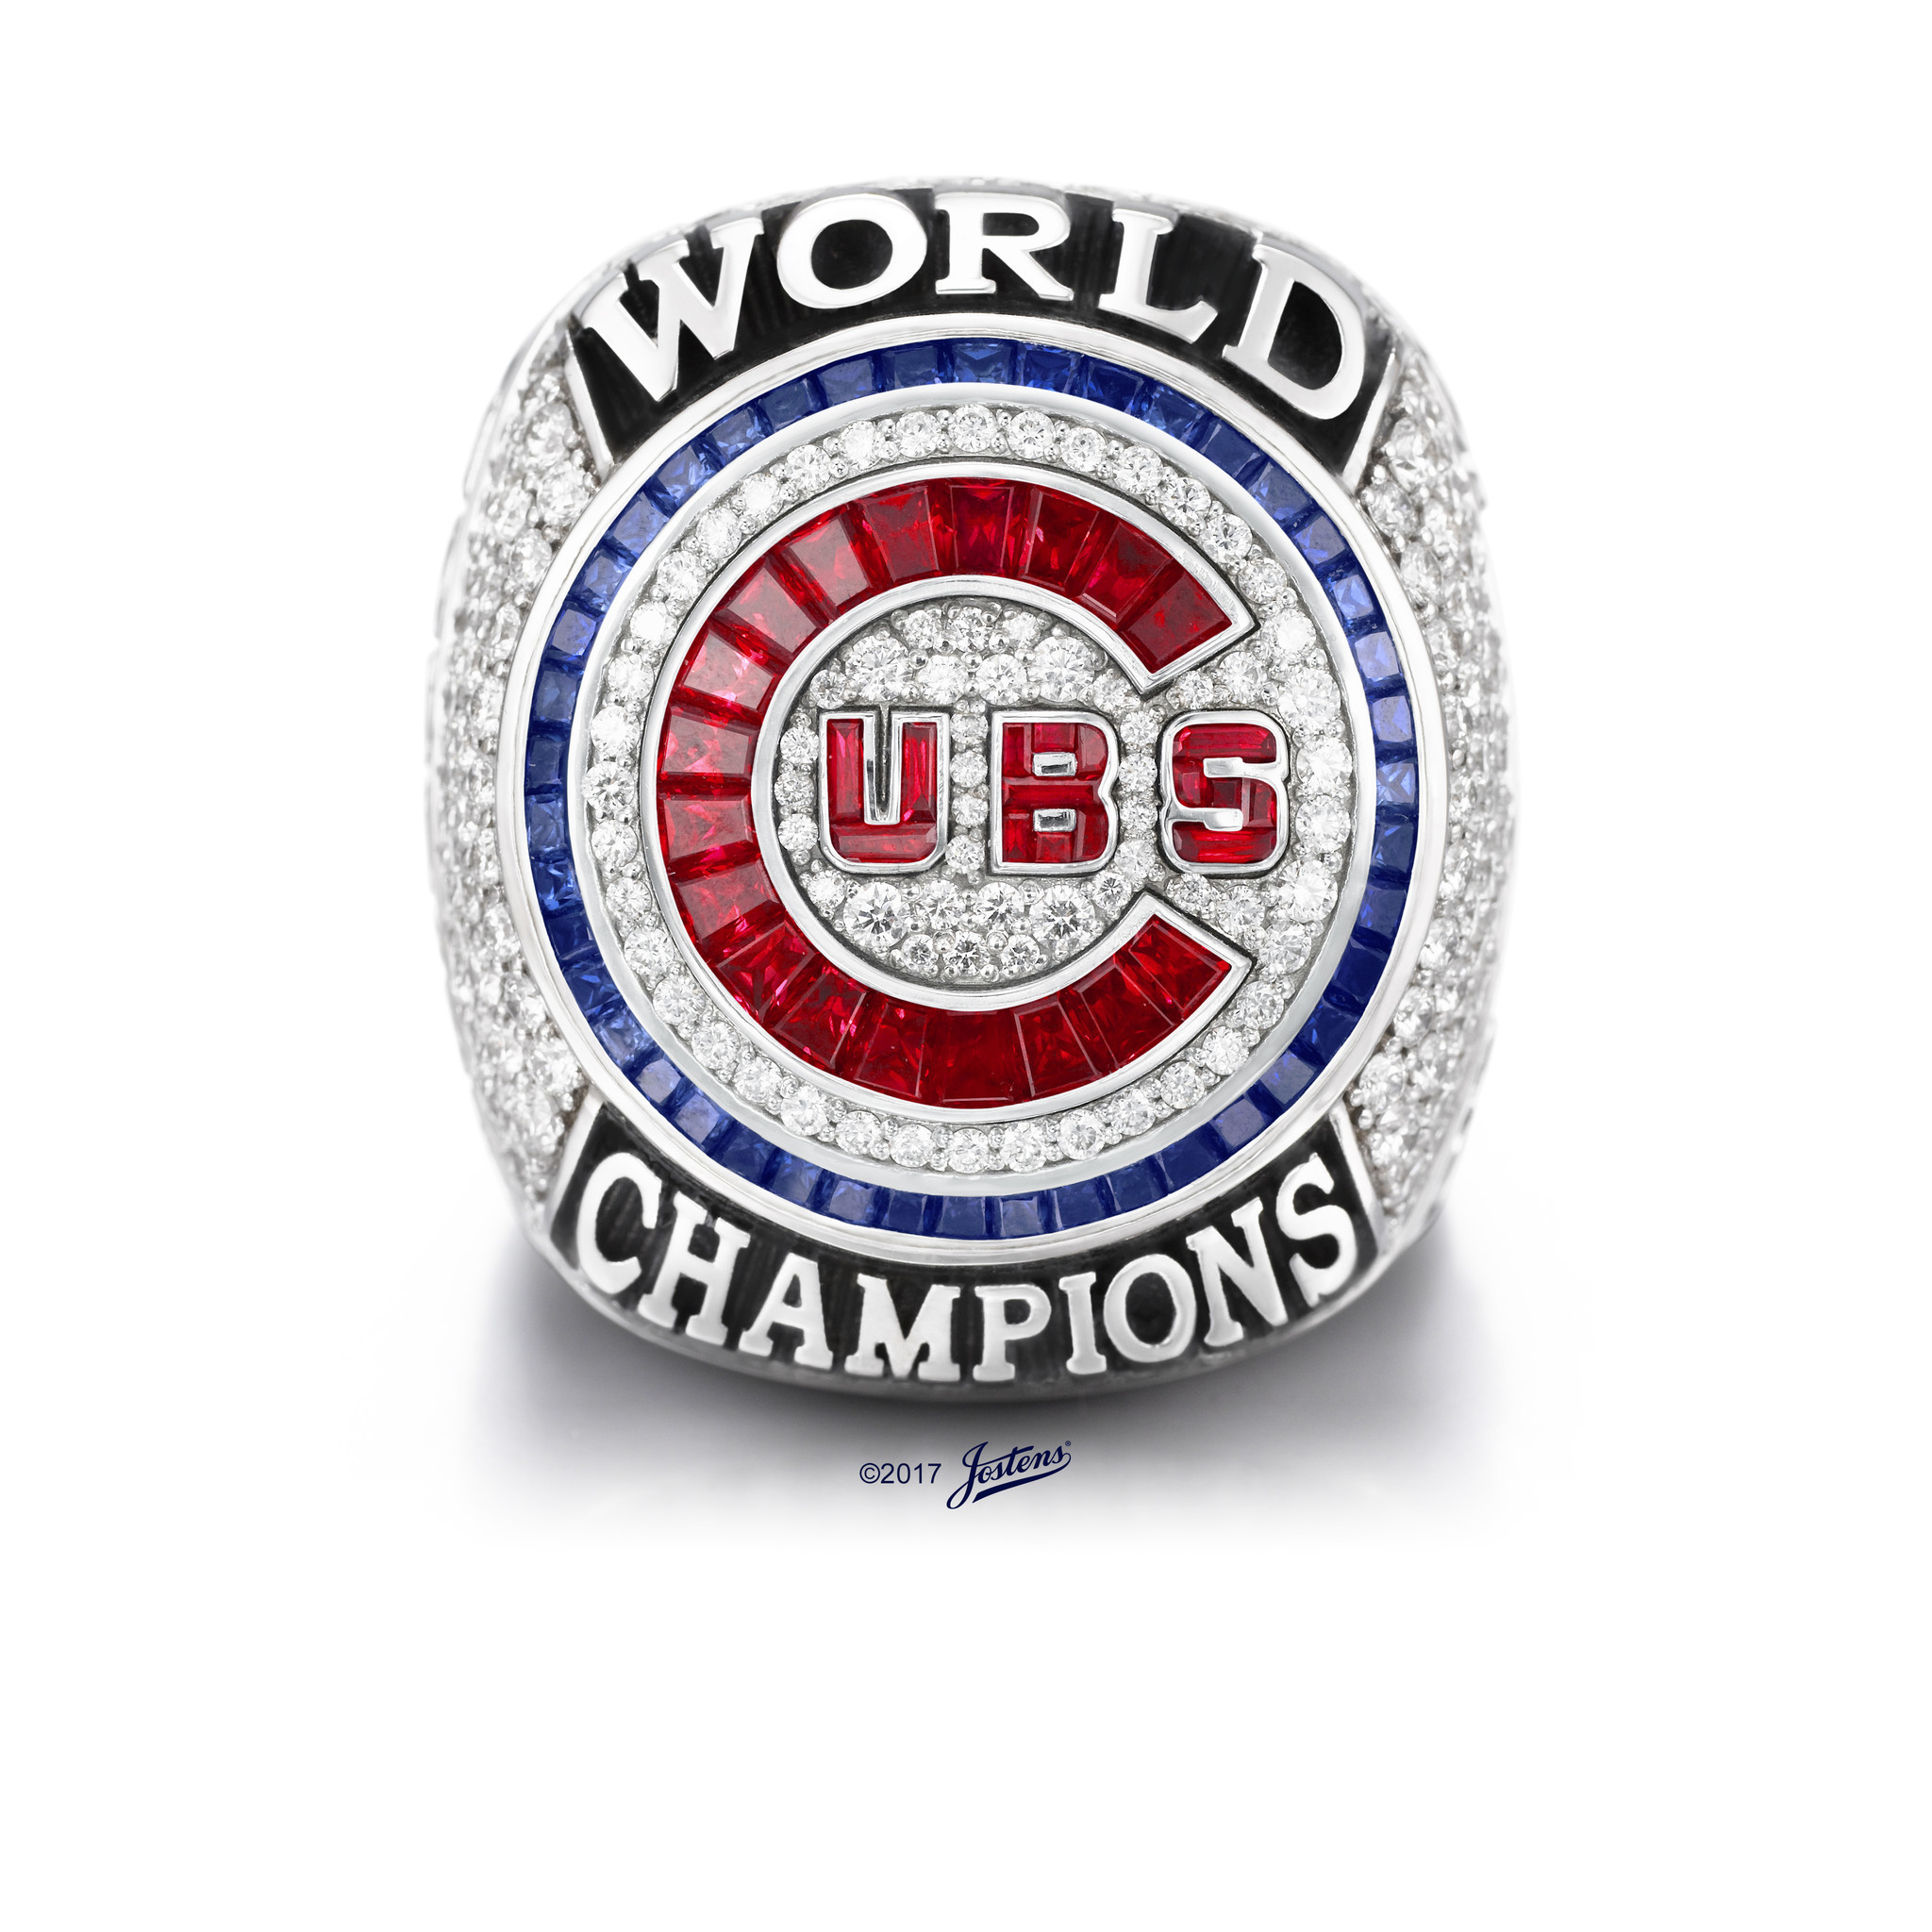 Bartman given a WS ring by Cubs, 08/01/2017